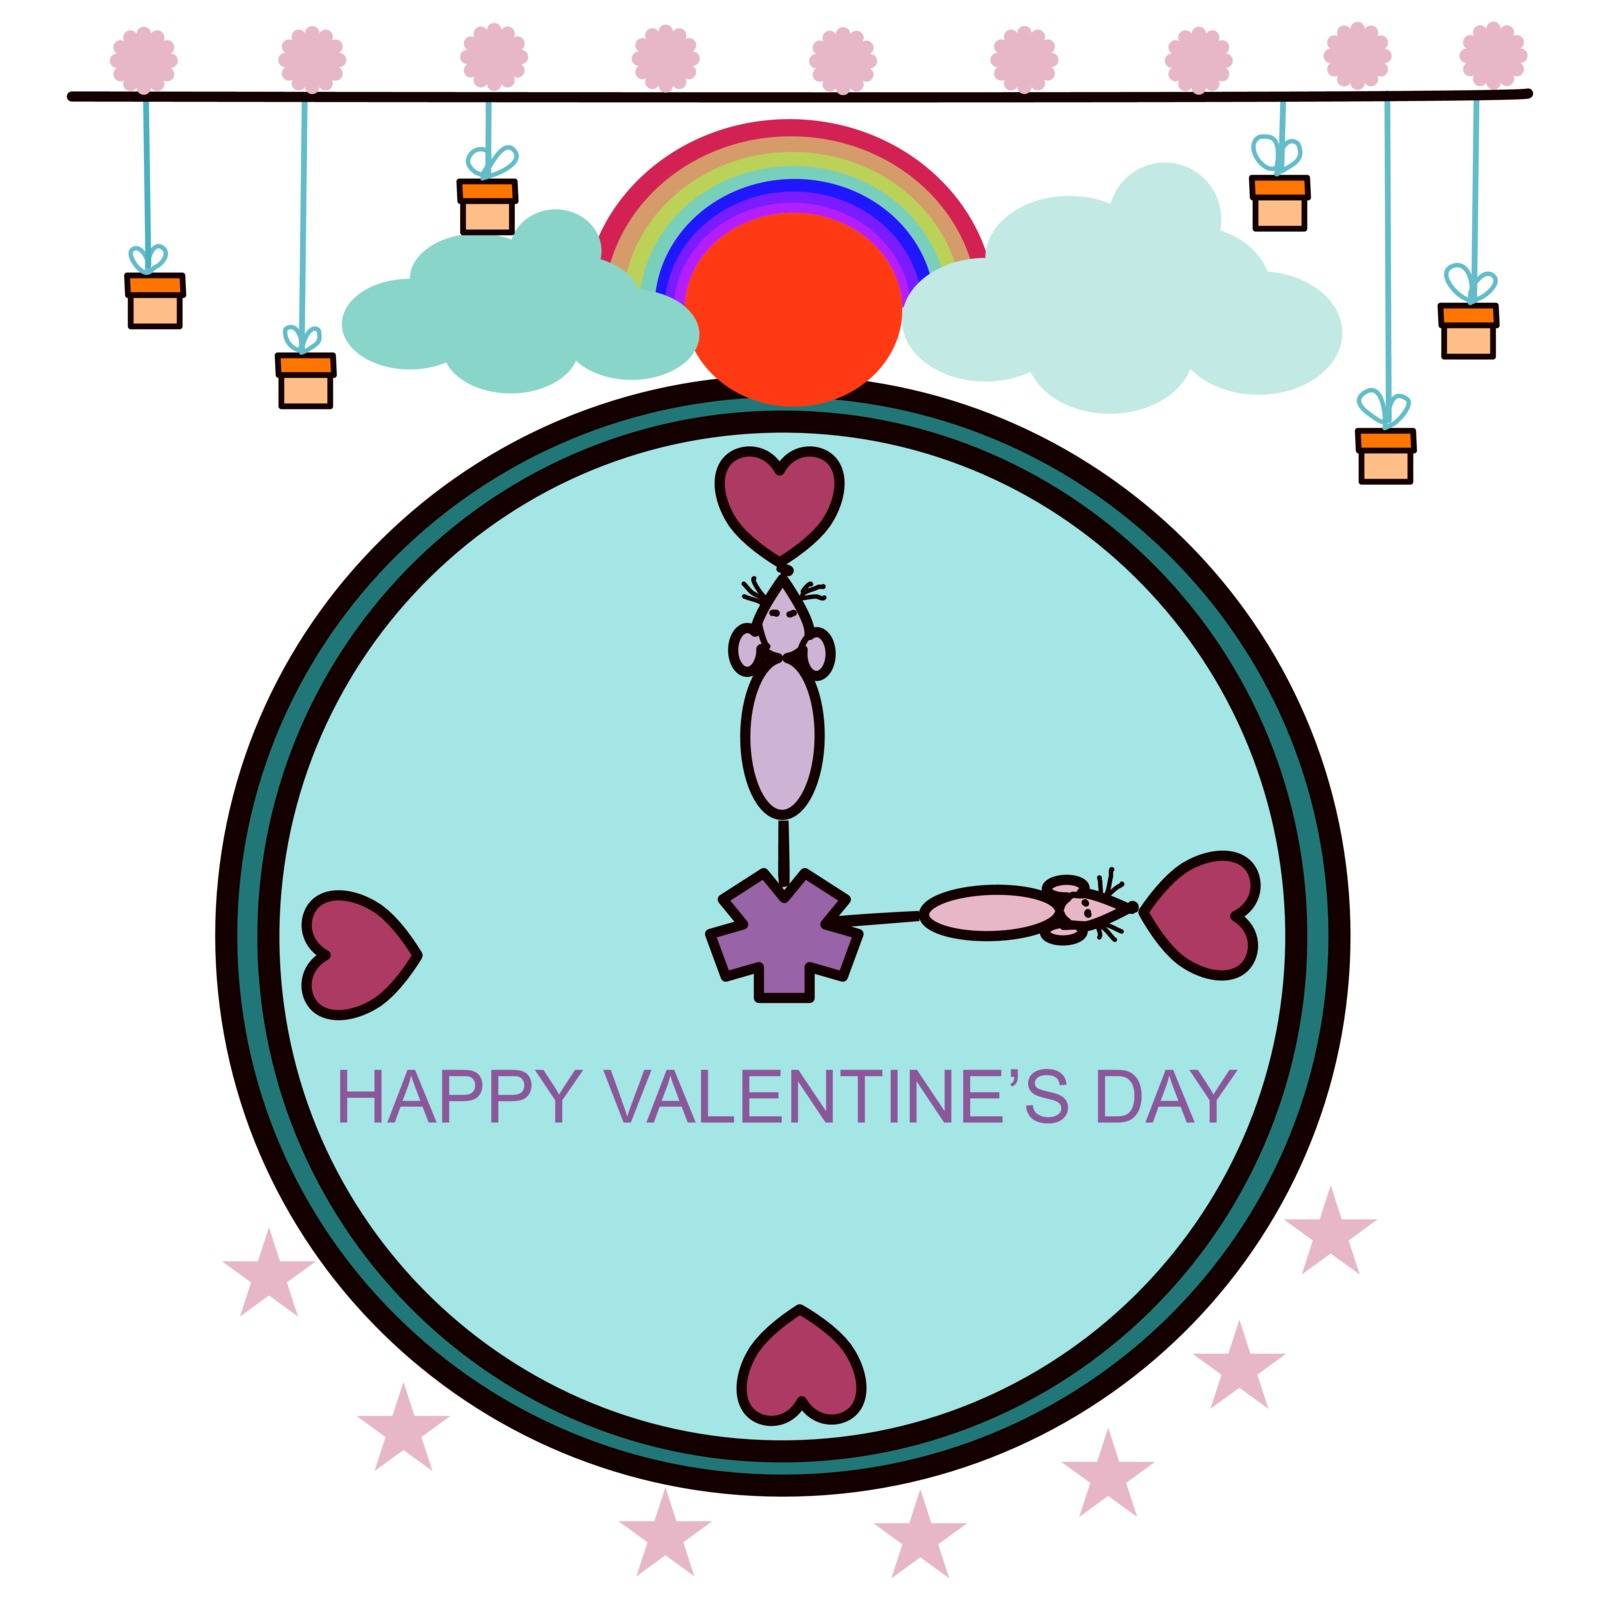 Happy valentine’s day have gift, rainbow, red sun, cloud and clock with mouse and heart on white background.